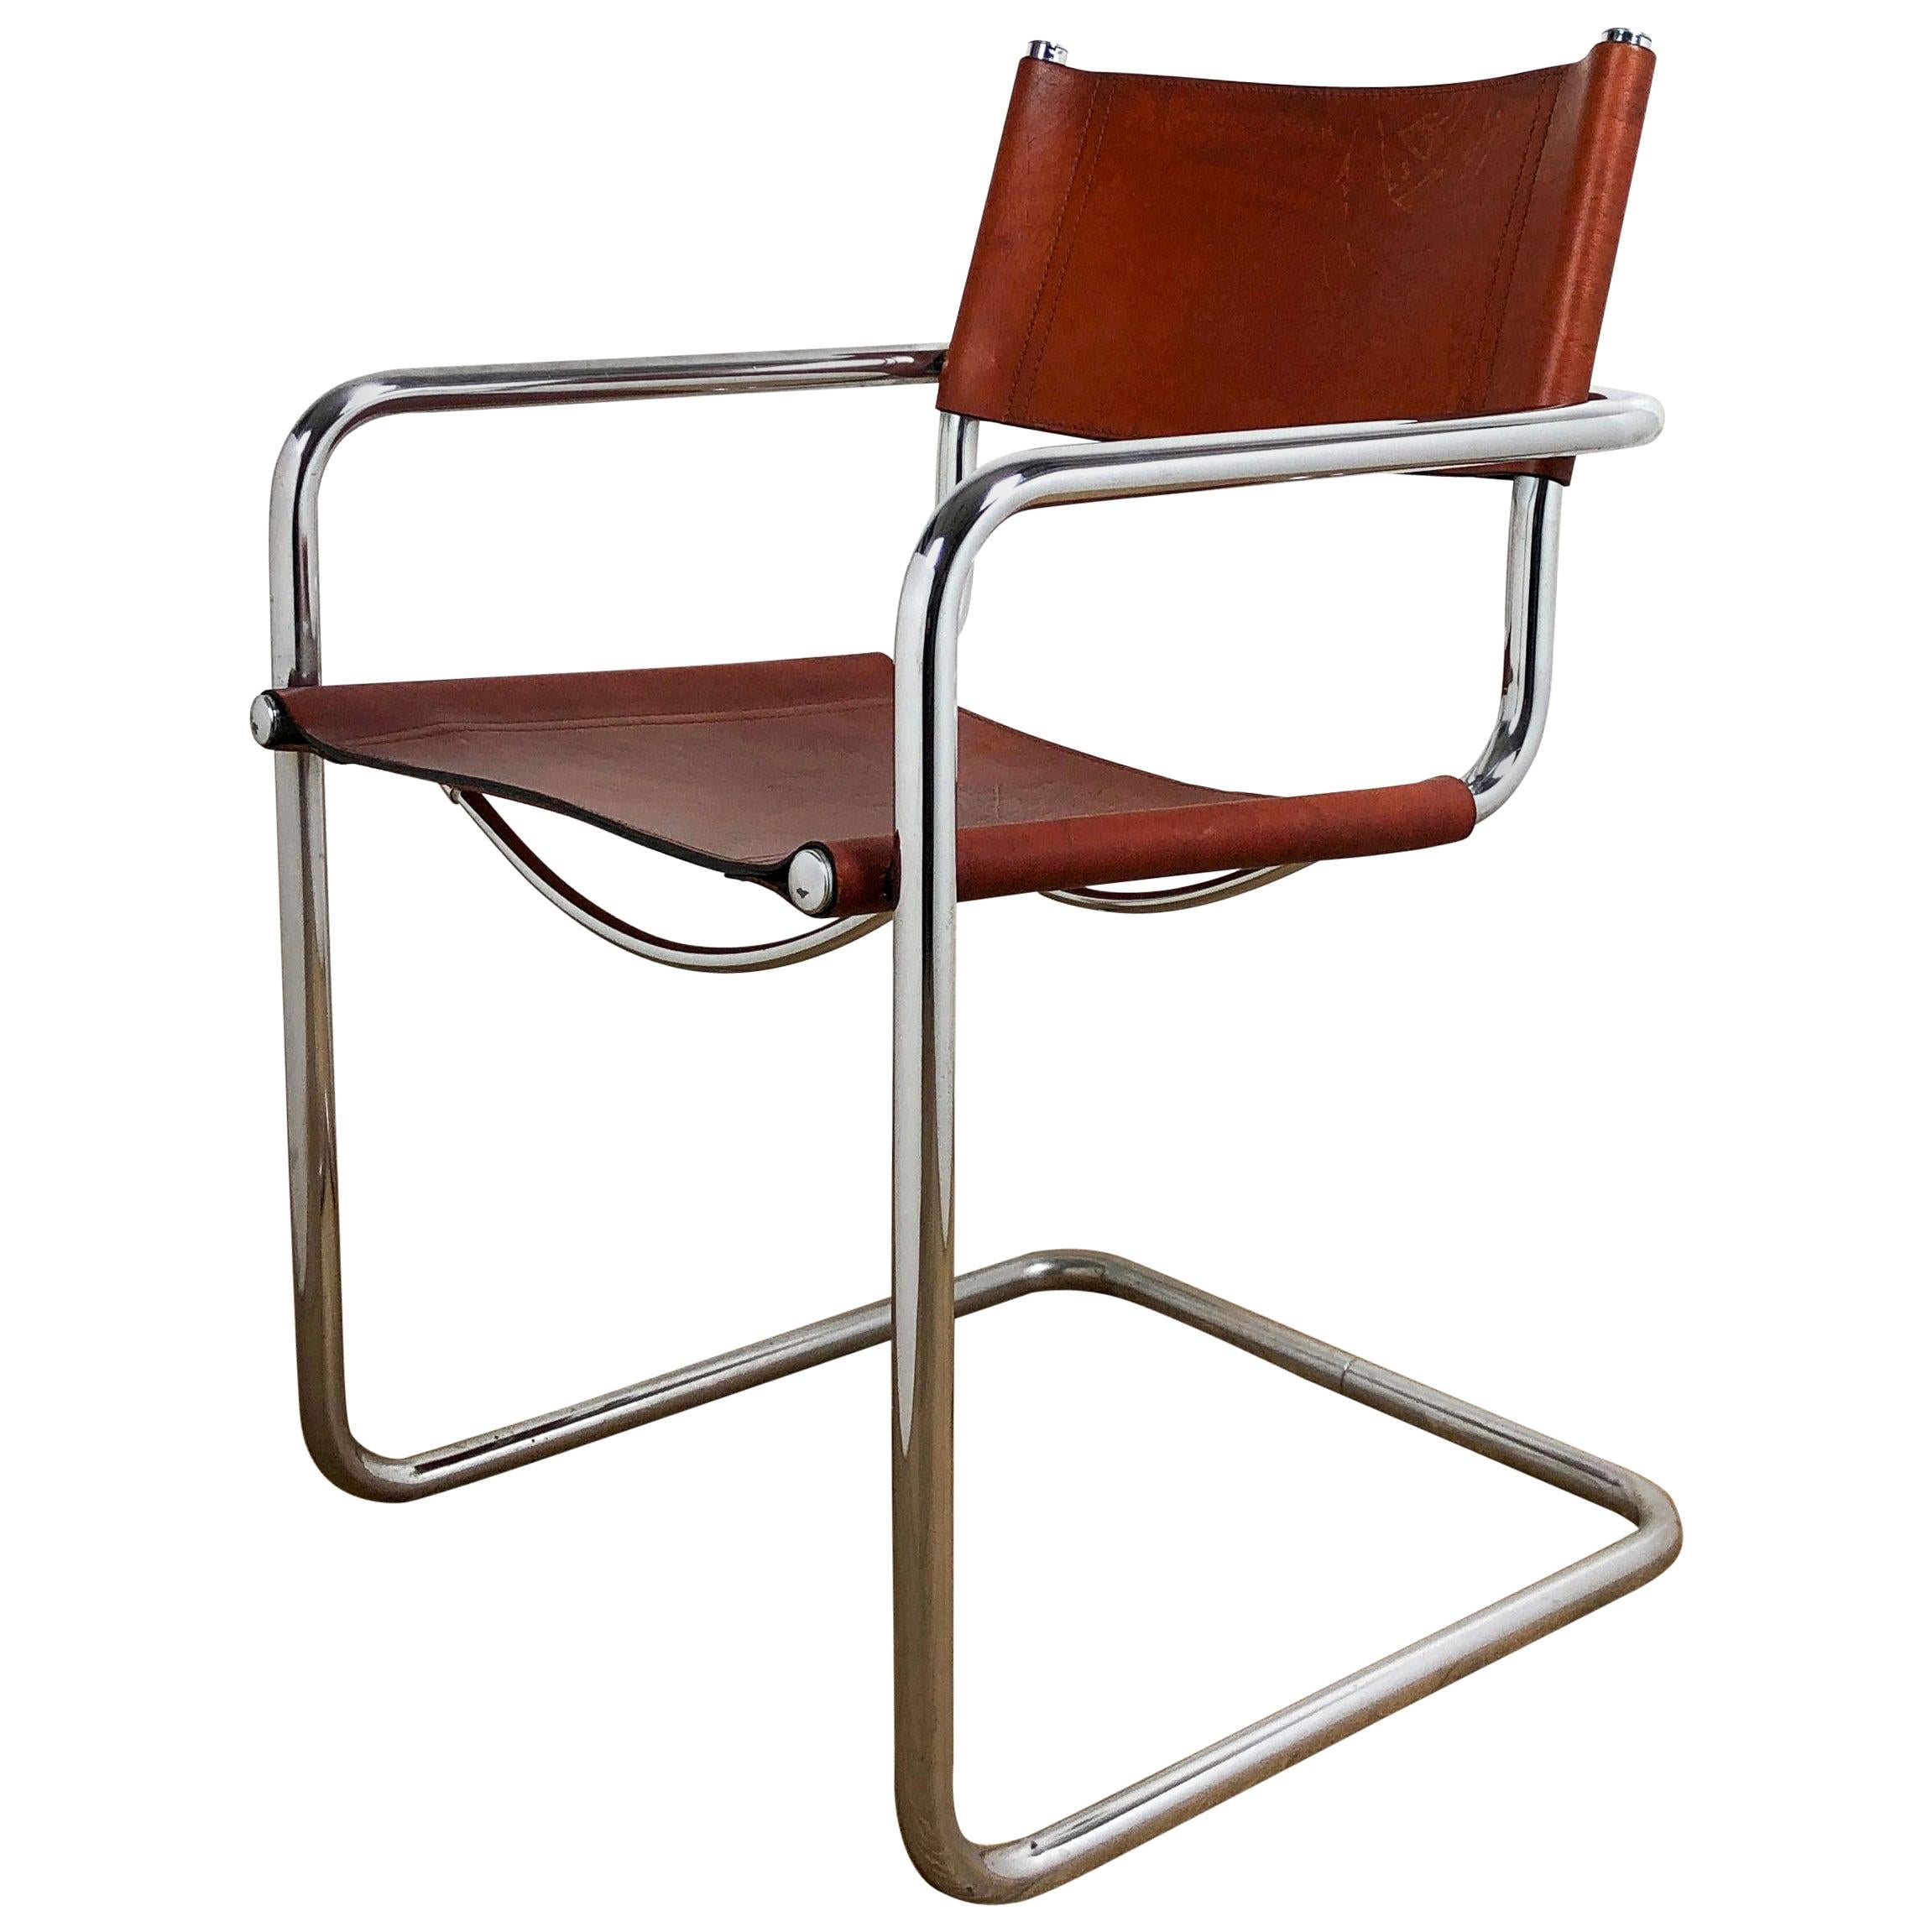 Brown Leather Chrome-Plated Tubular Steel Cantilever Chair Mart Stam Style